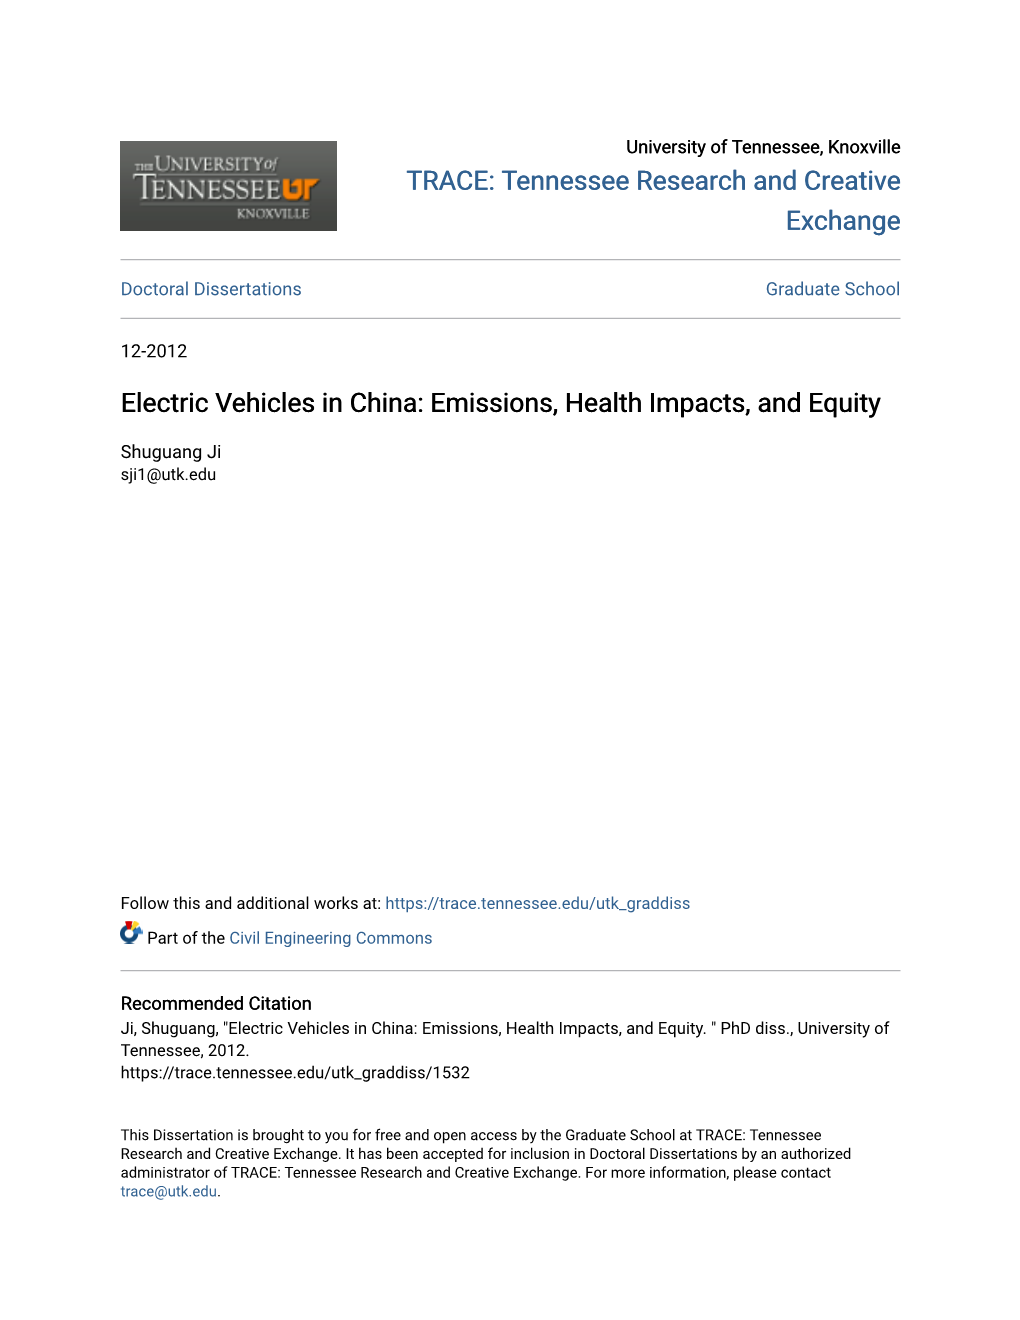 Electric Vehicles in China: Emissions, Health Impacts, and Equity